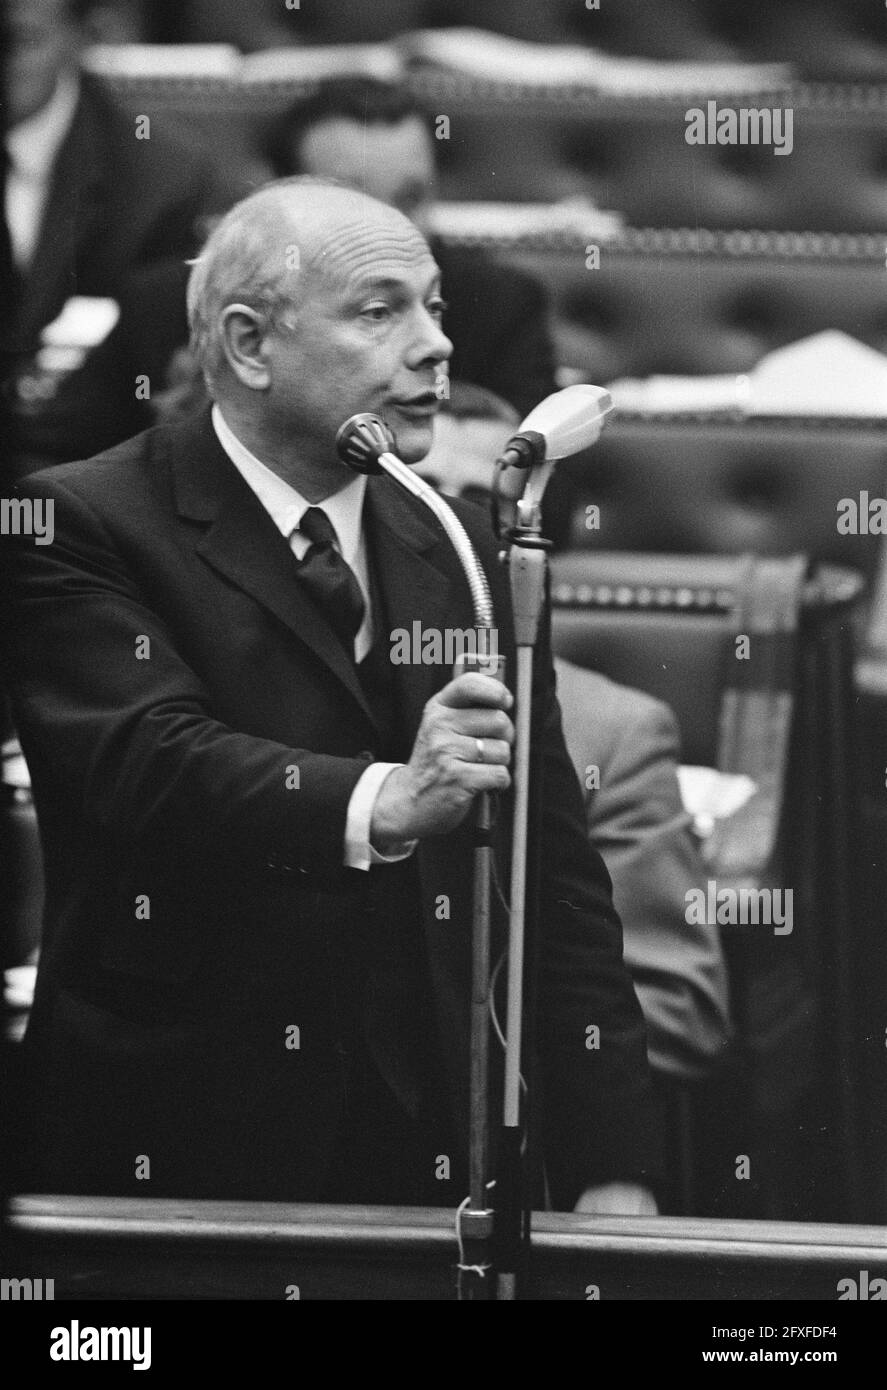 House of Representatives, government answers after first round debates of the parties. Number 16 Minister Witteveen Number 17 Den Uyl, 16 October 1969, Debates, The Netherlands, 20th century press agency photo, news to remember, documentary, historic photography 1945-1990, visual stories, human history of the Twentieth Century, capturing moments in time Stock Photo